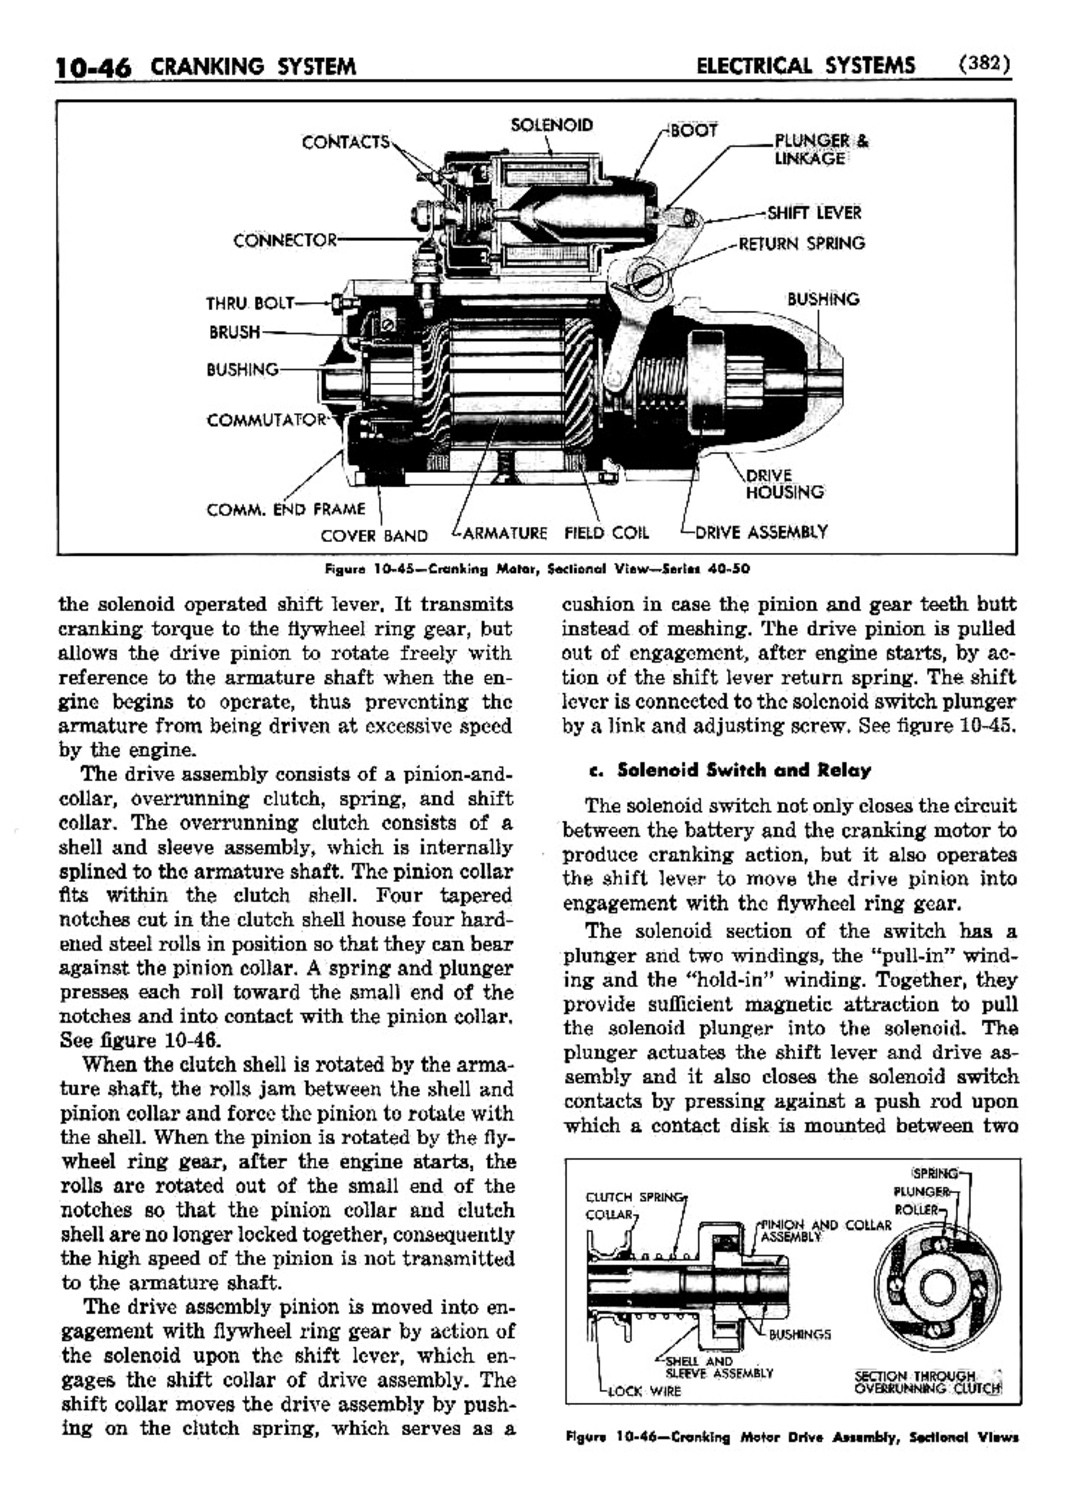 n_11 1952 Buick Shop Manual - Electrical Systems-046-046.jpg